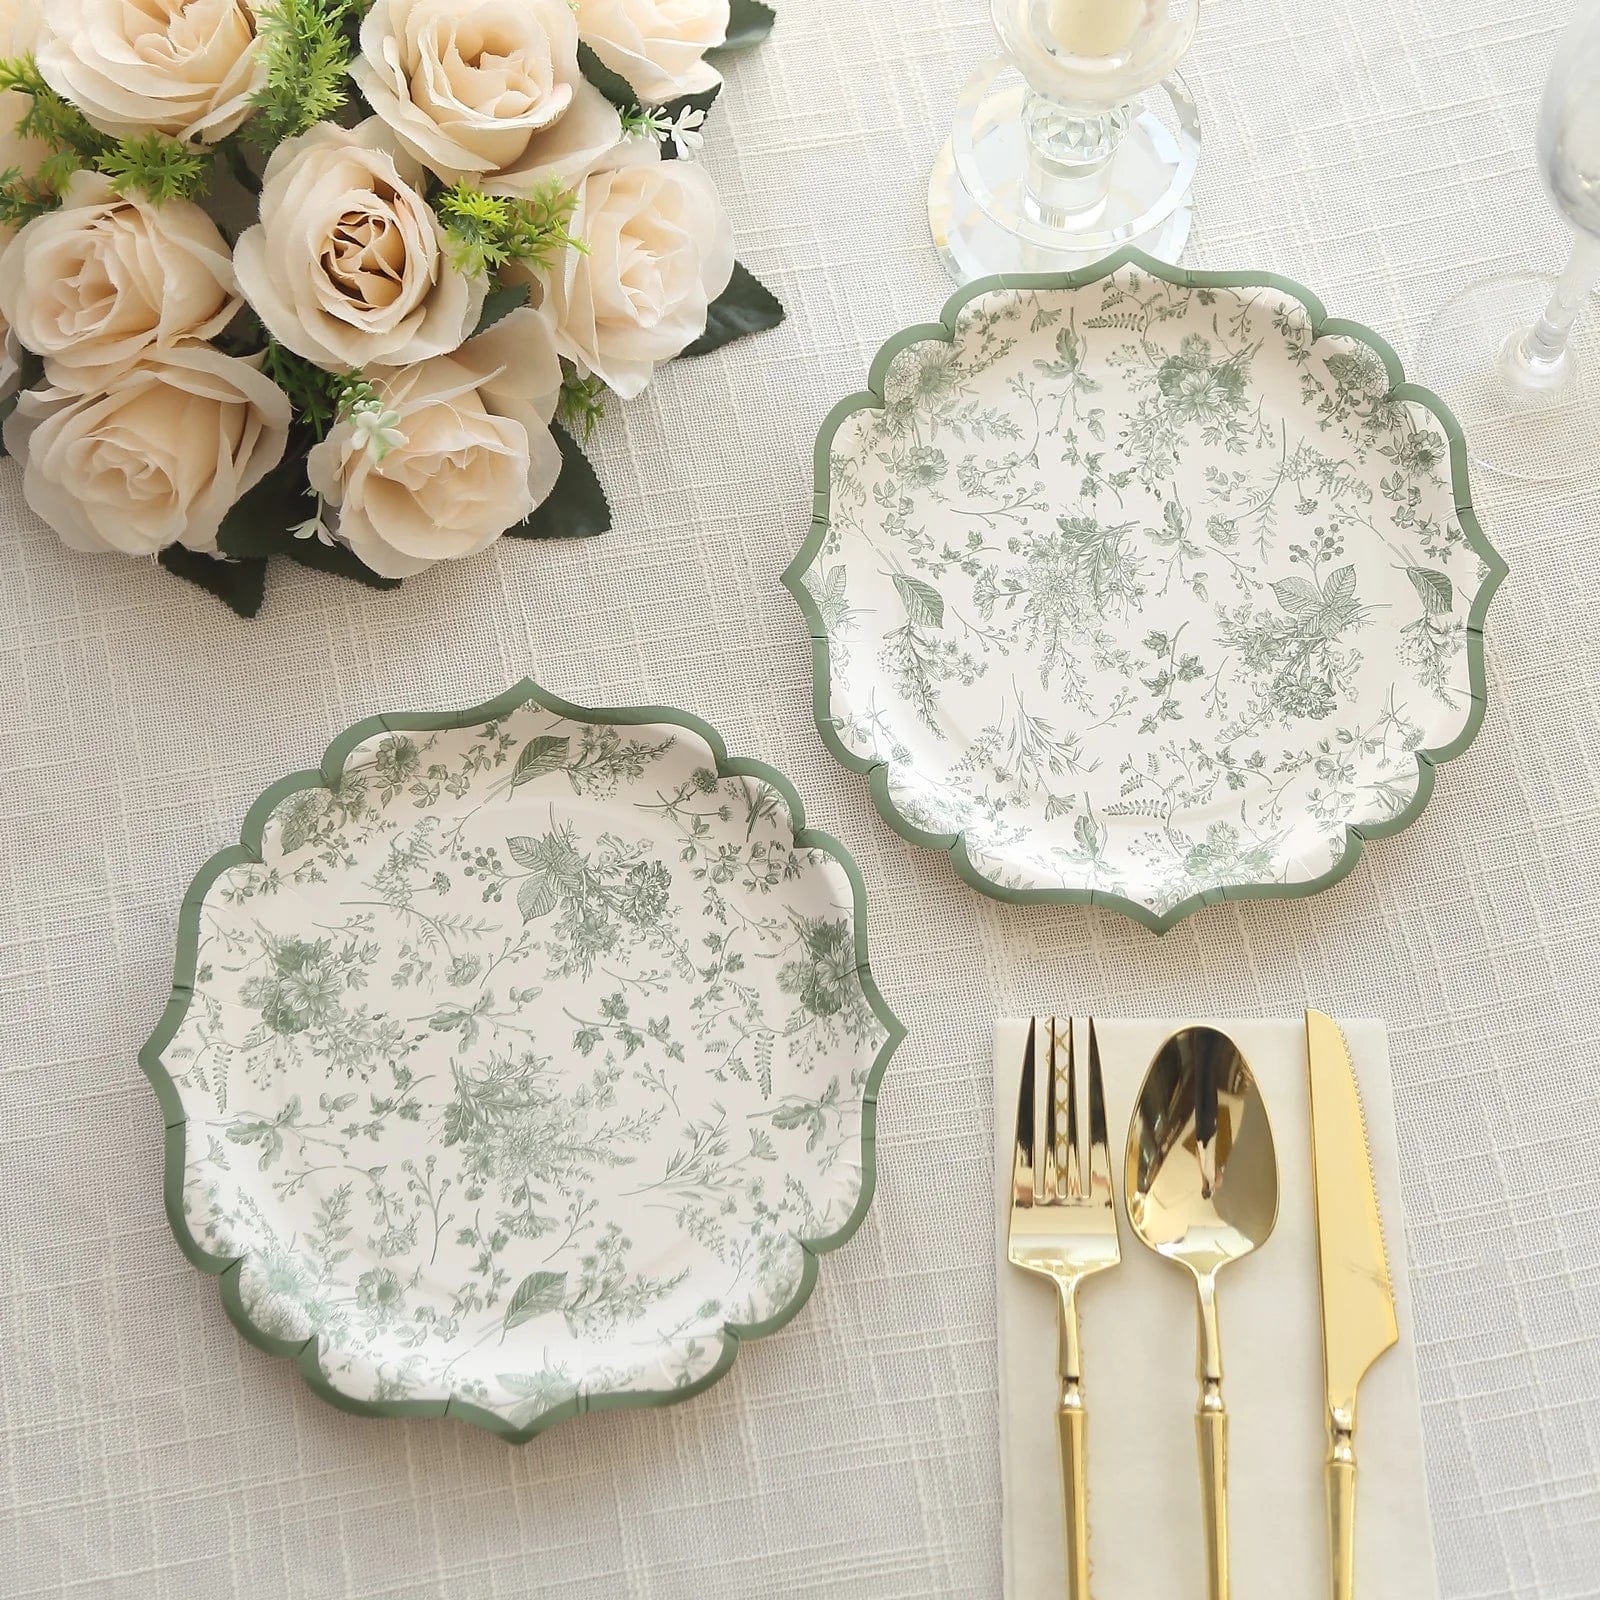 25 White and Sage Green Floral Leaf Print Paper Plates with Scalloped Rim - Disposable Tableware